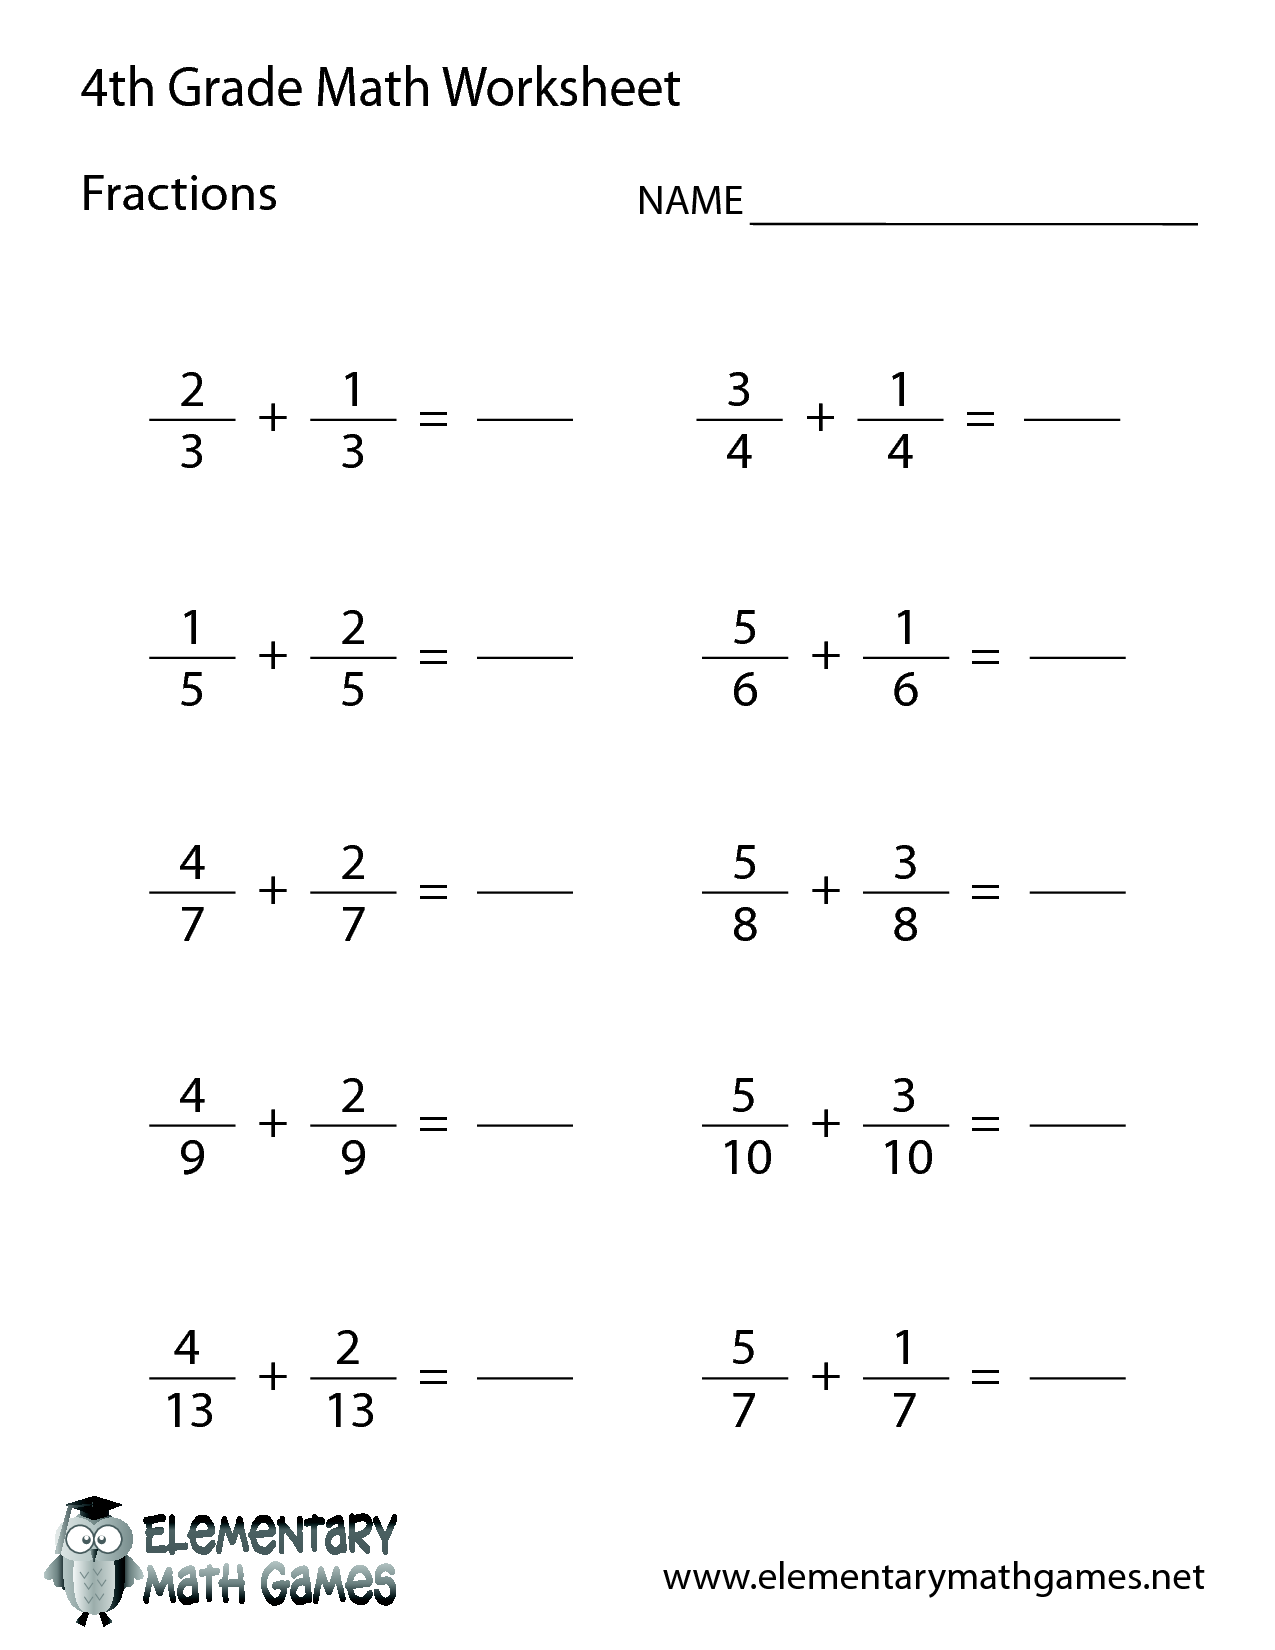 12 Images of 4th Grade Math Worksheets For Free